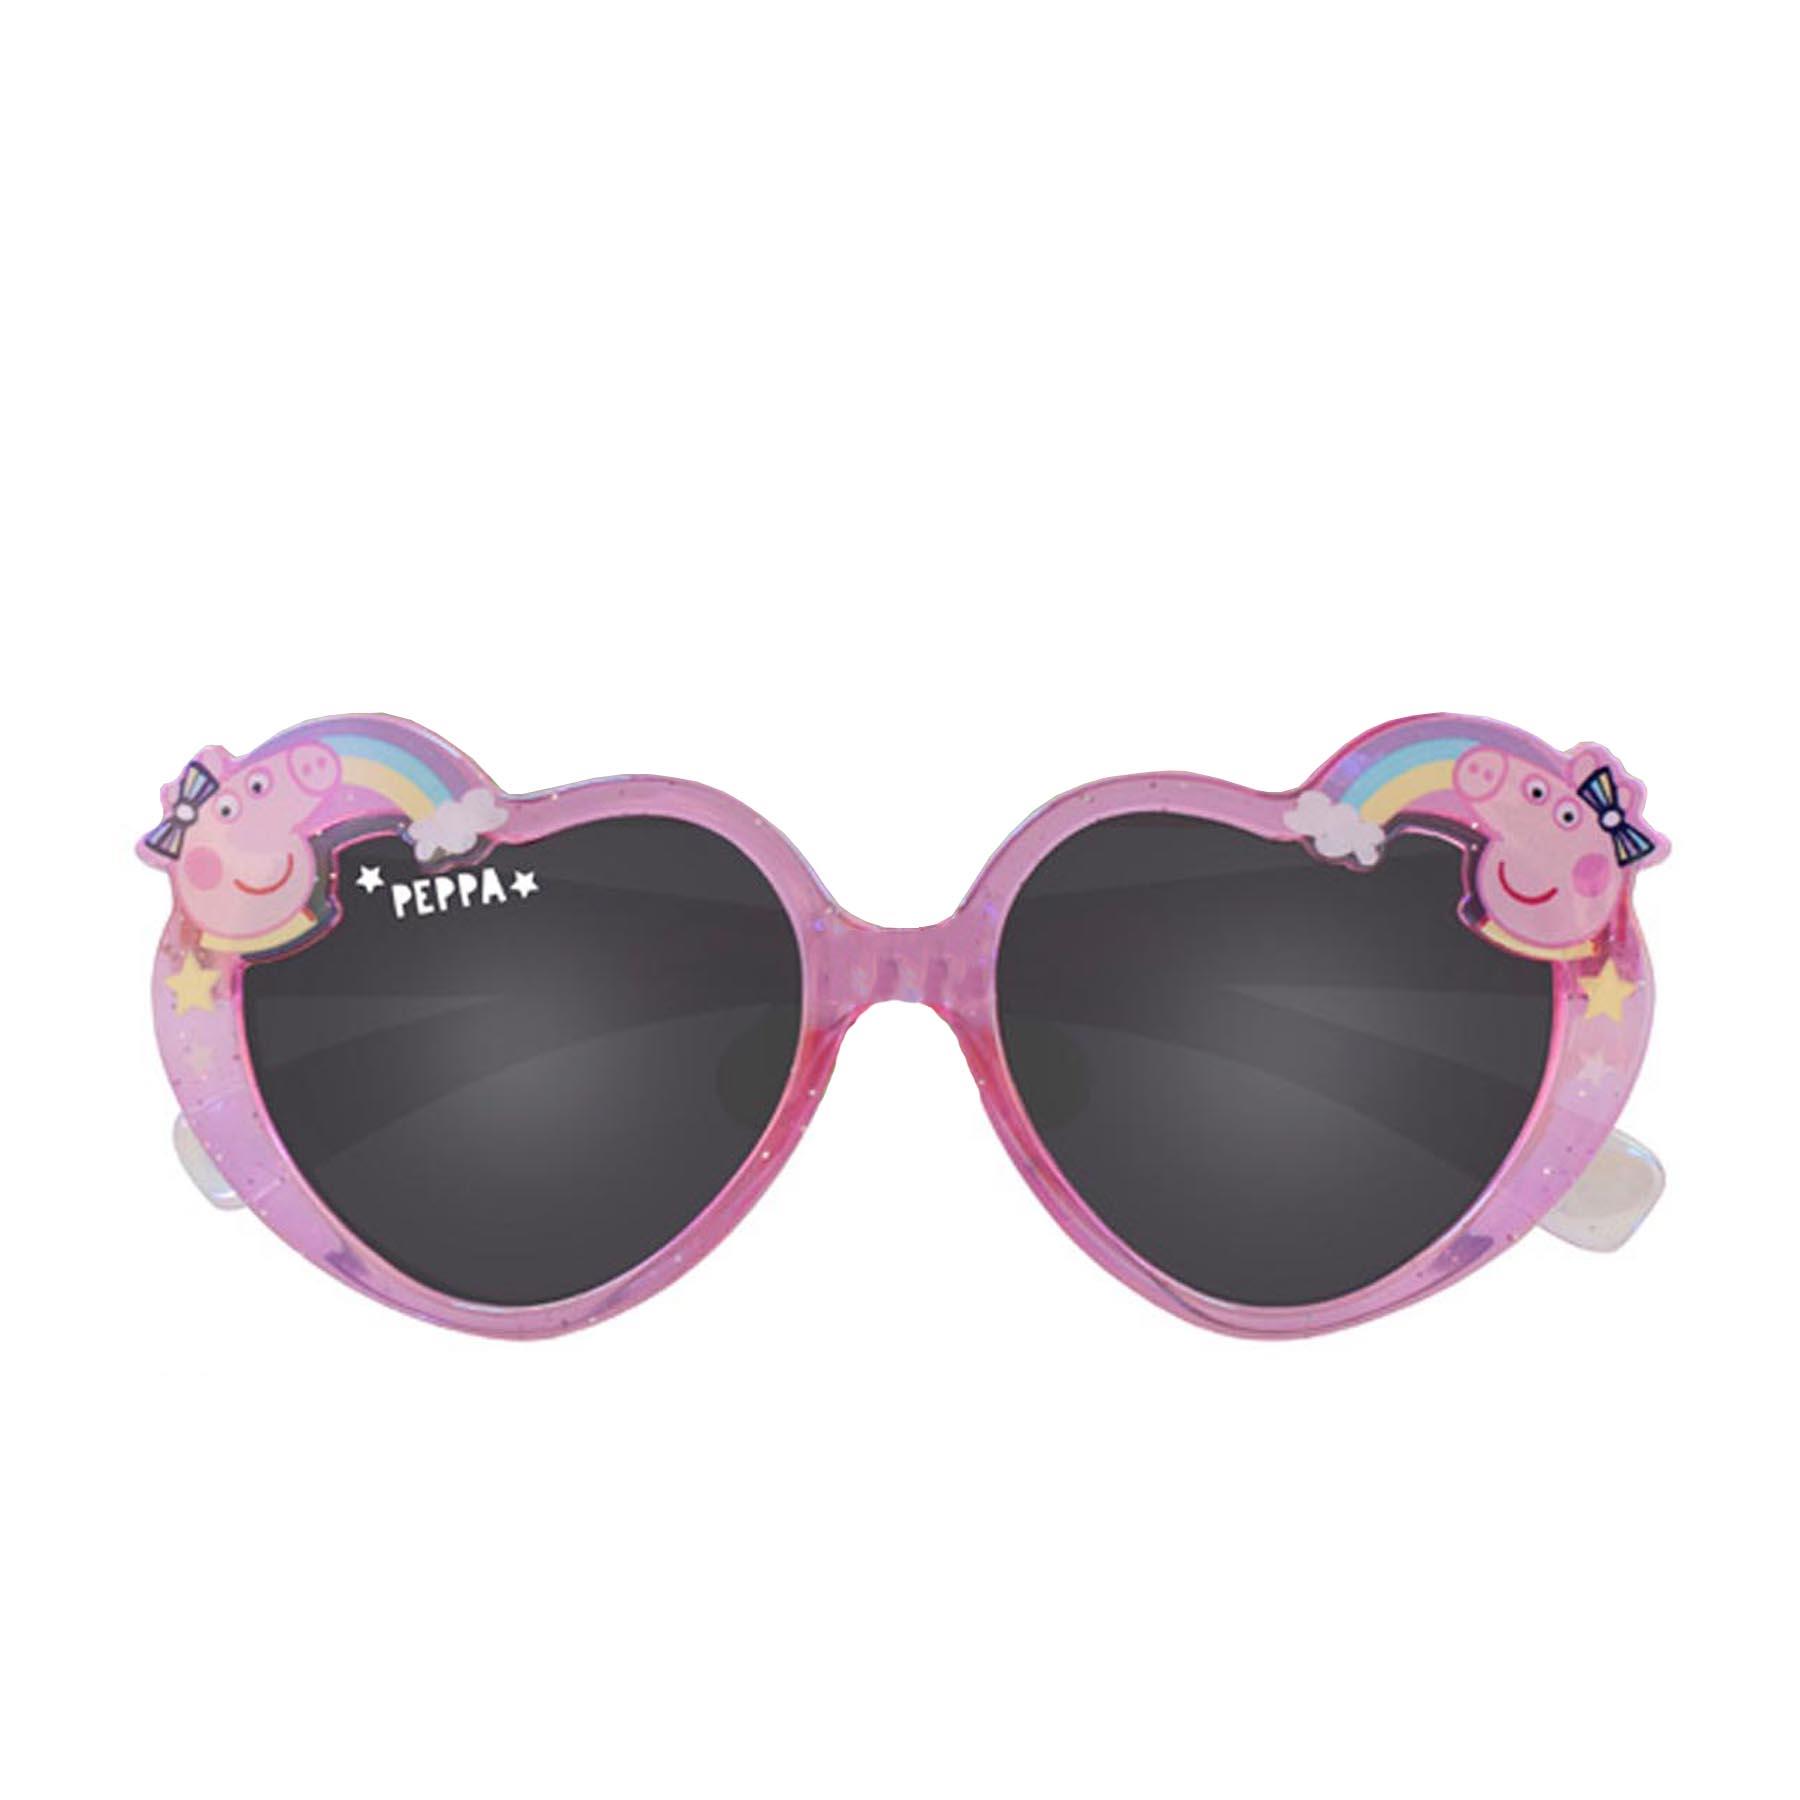 Peppa Pig Children's Character Sunglasses UV protection for Holiday - PEPPA1